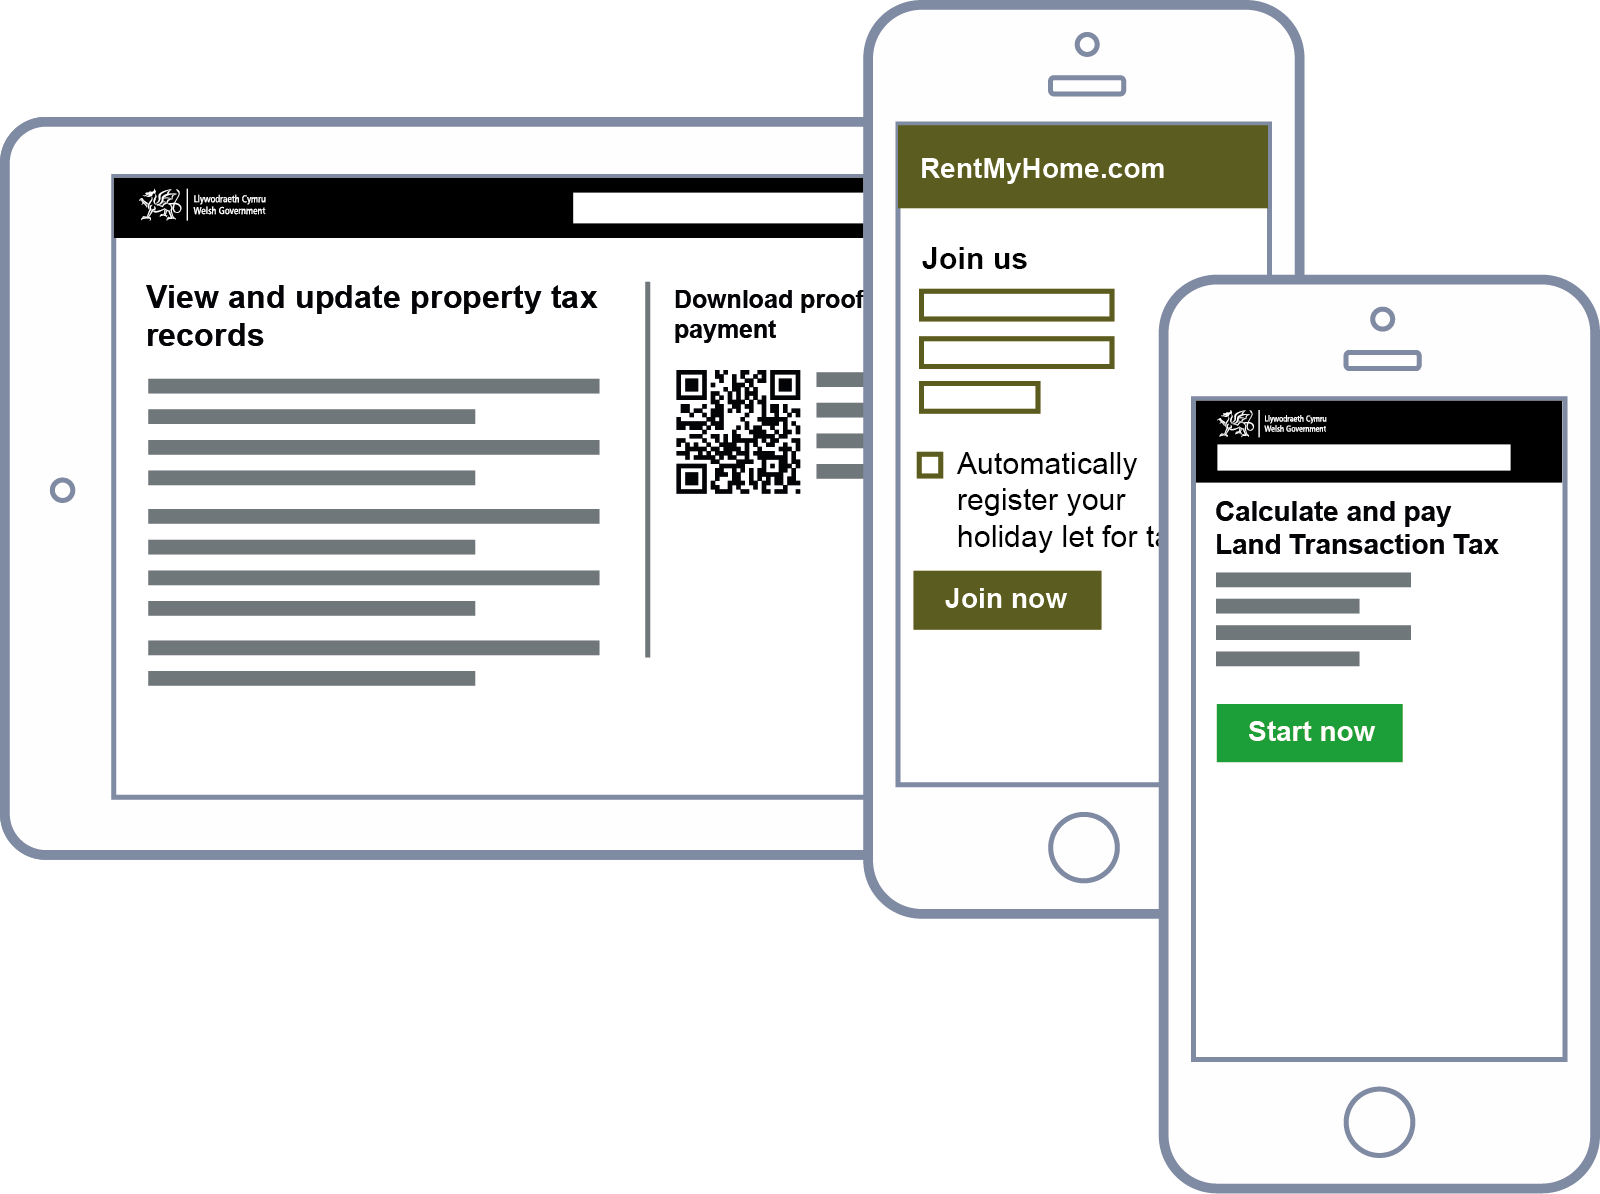 Mockups of three examples services: a government property account, a commercial service for renting out a home and a government service for paying tax